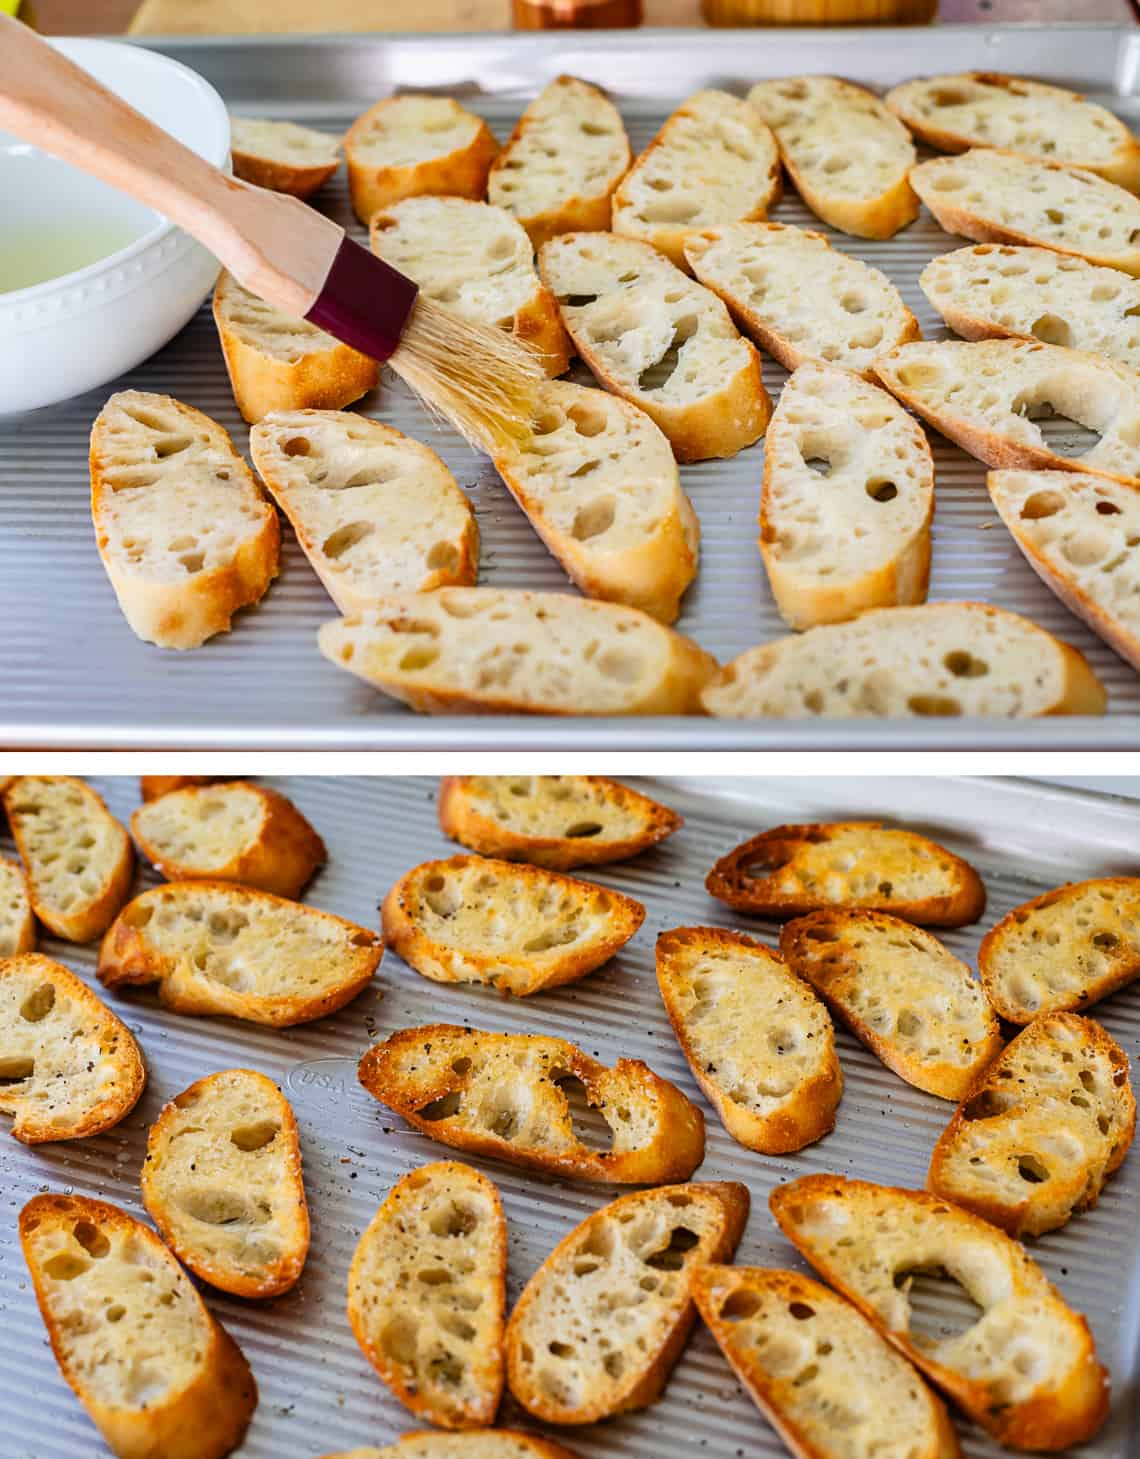 Prepping sliced french bread with oil, salt, and pepper and toasted slices after having come out of the oven.